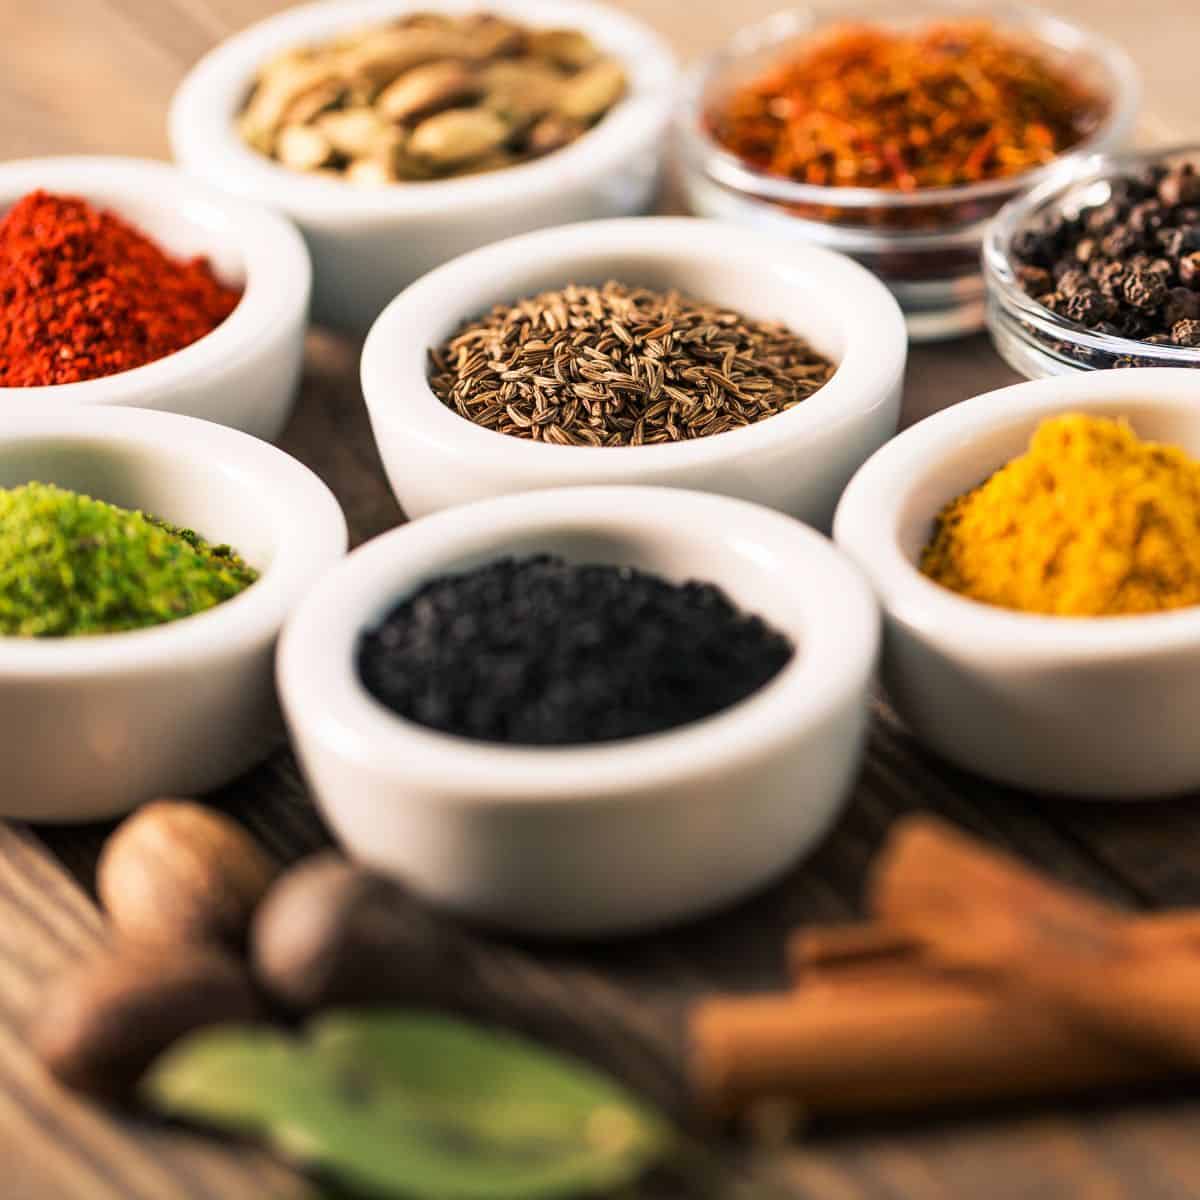 The Must-Have Spice Starter Kit: 10 Essential Spices to Stock Your RV Kitchen